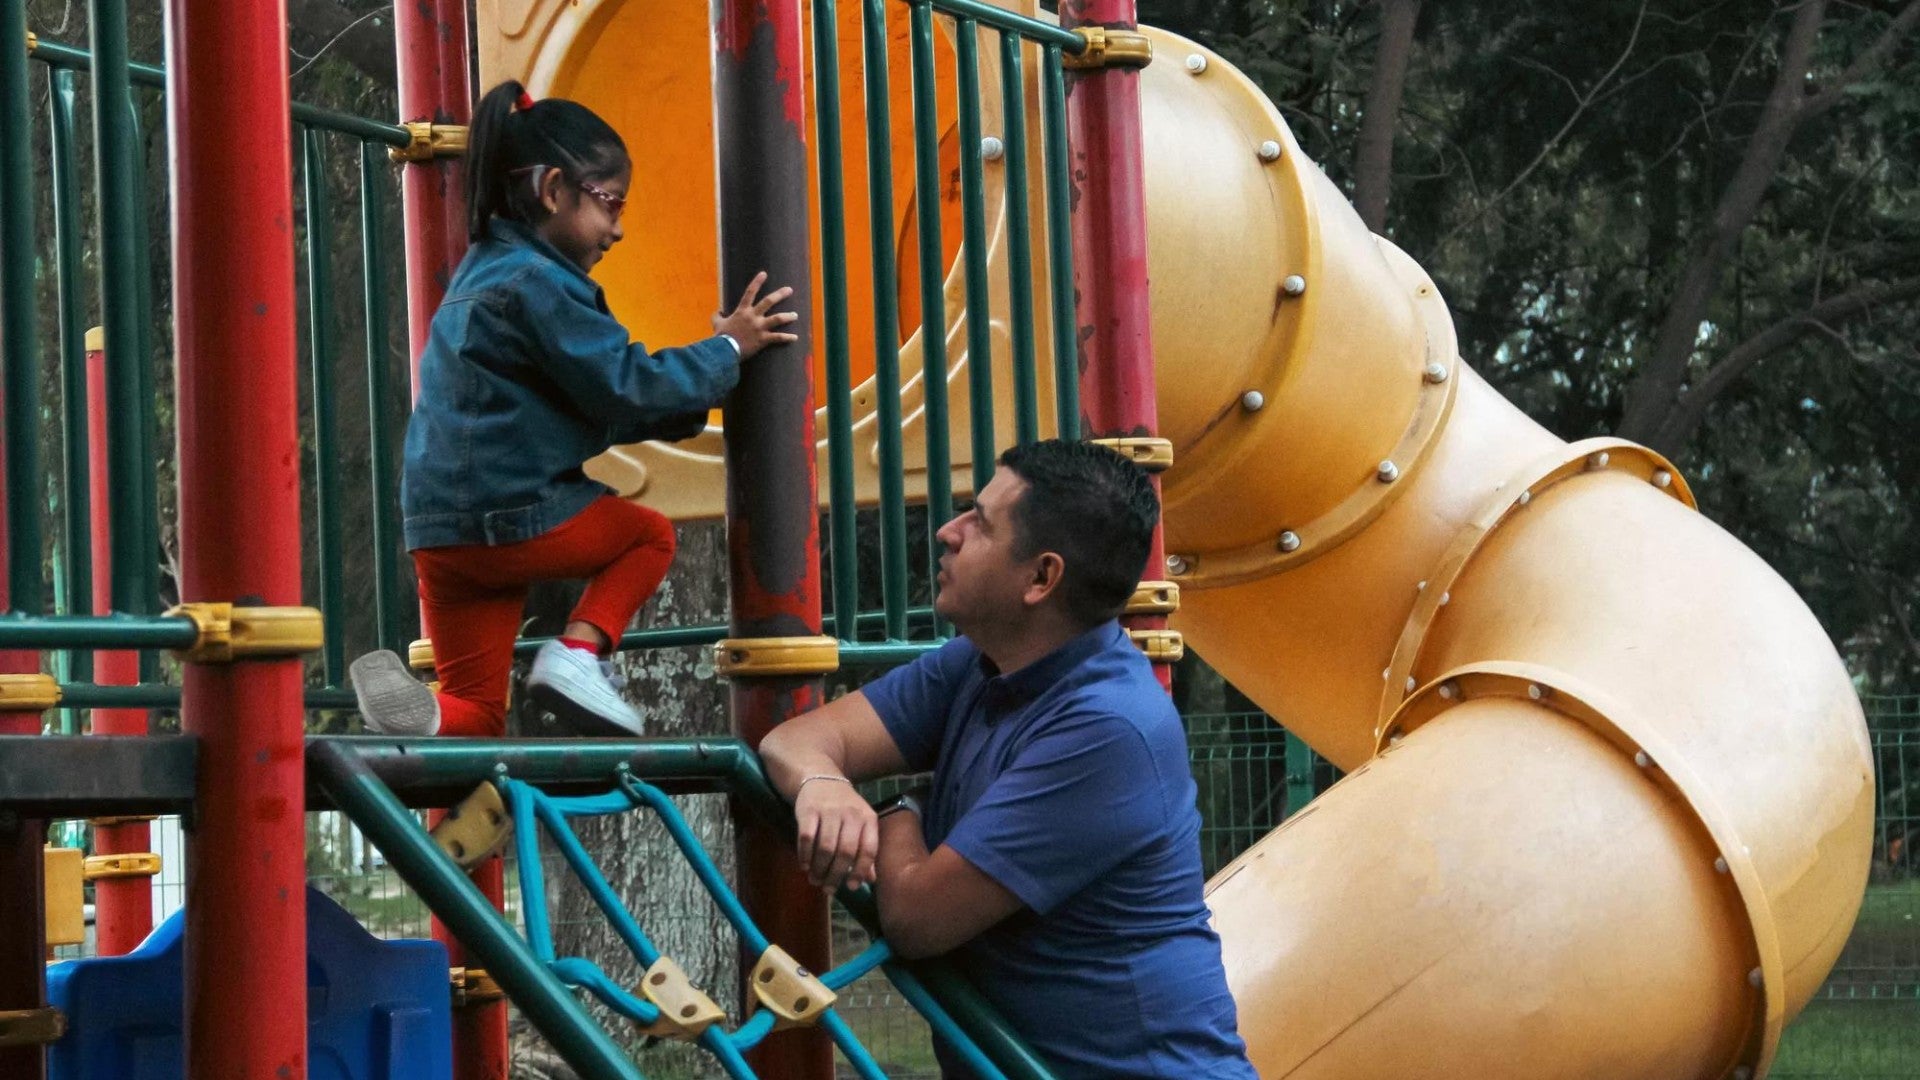 A young girl is on playground equipment that has a big slide; her father is leaning on the equipment looking at her.